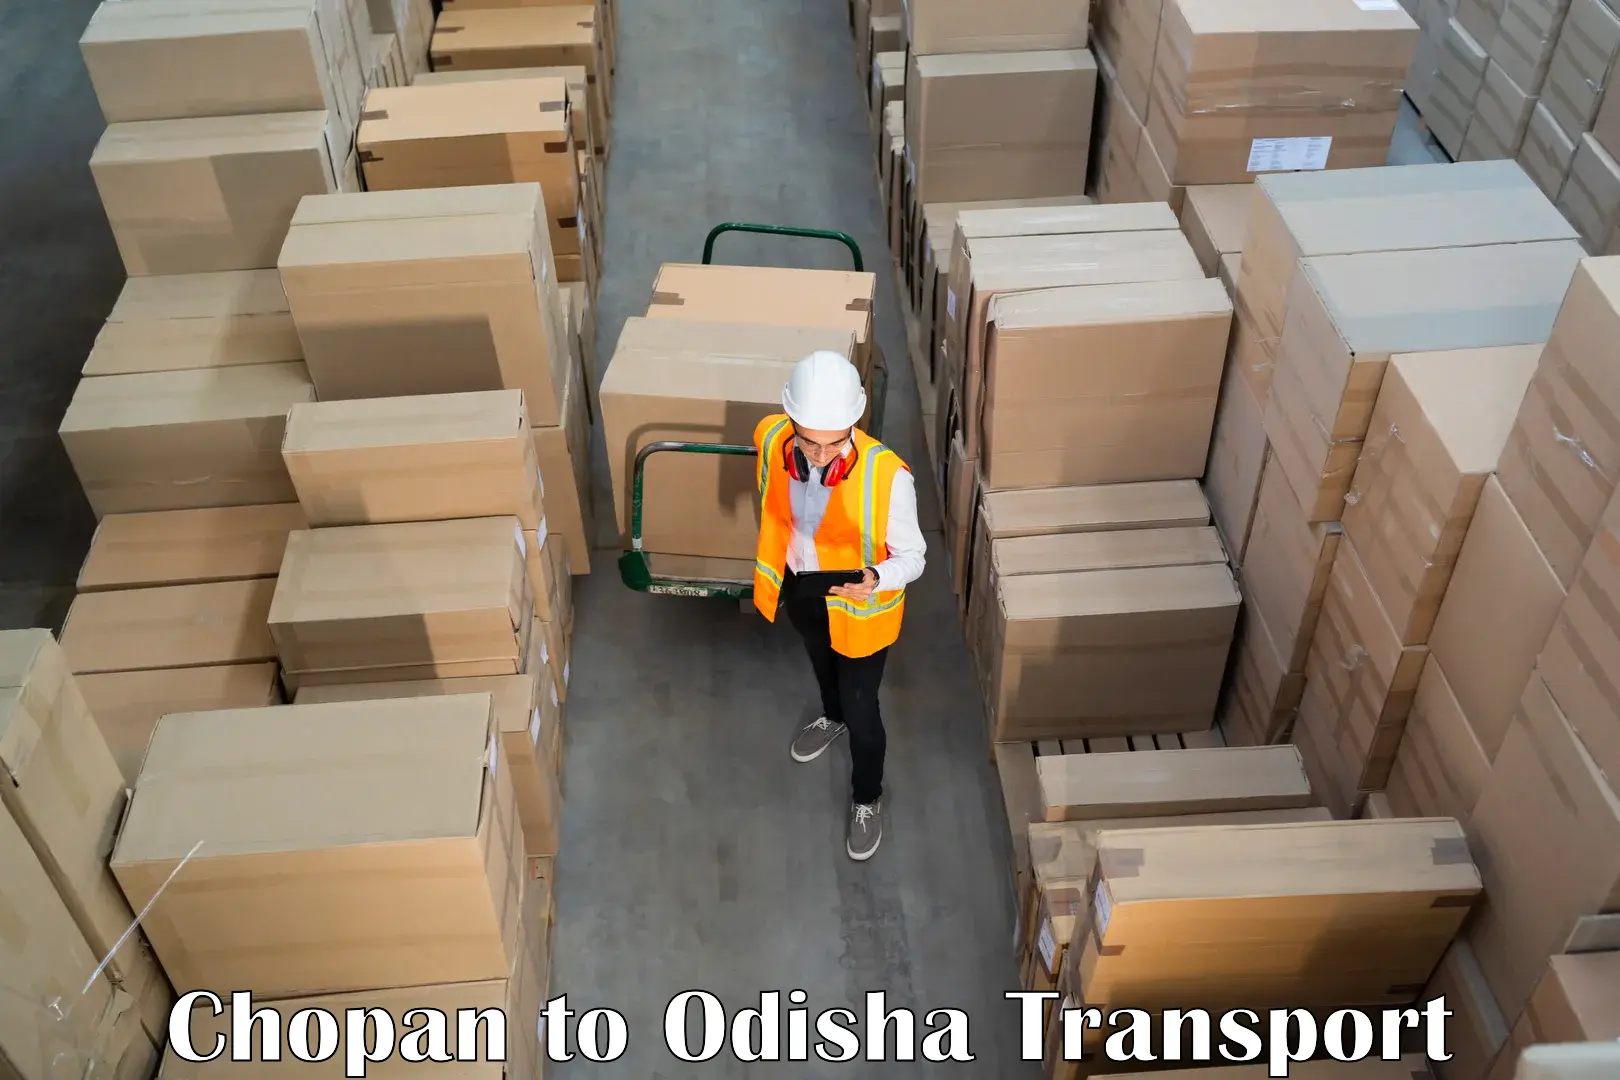 Truck transport companies in India Chopan to Paradip Port